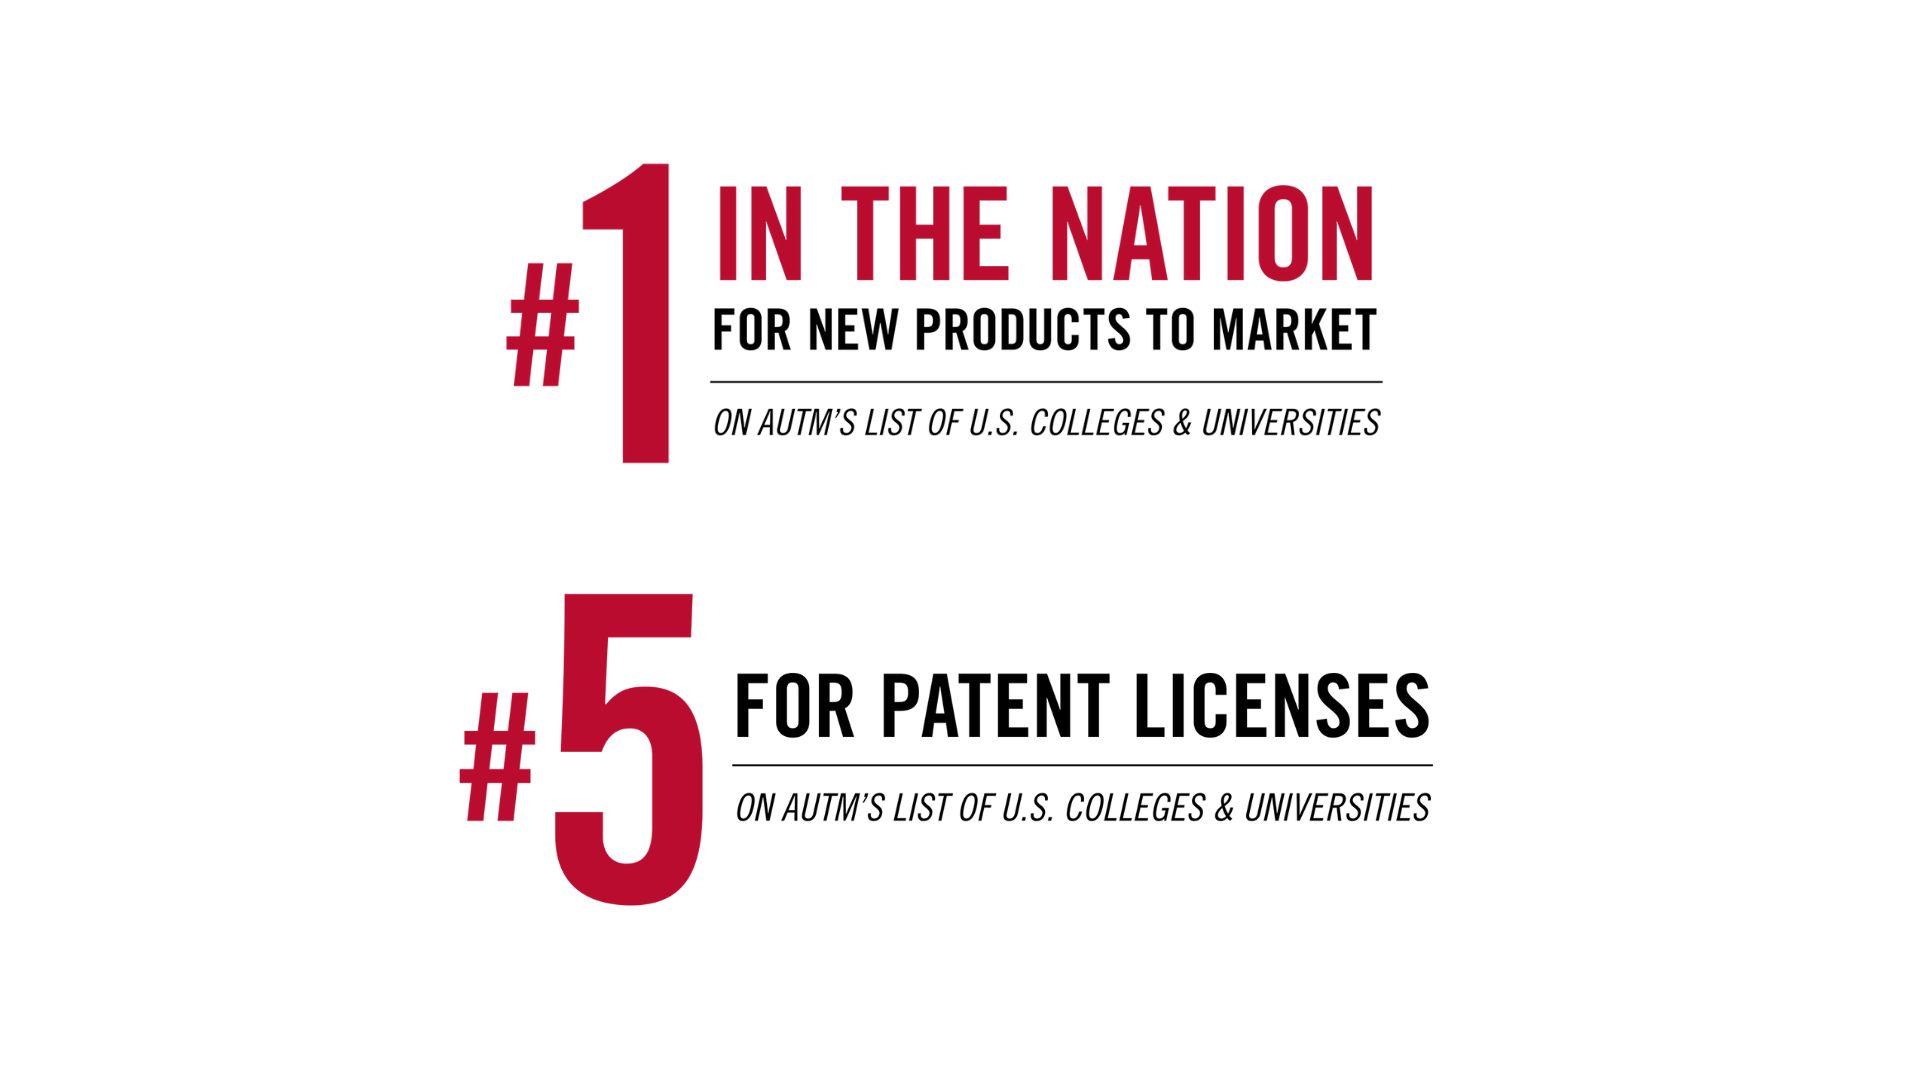 Graphics of UGA research rankings. First graphic: #1 in the nation for new products to market on AUTM's list of U.S. Colleges and Universities. Graphic 2: #5 for patent licenses on AUTM's list of U.S. Colleges and Universities